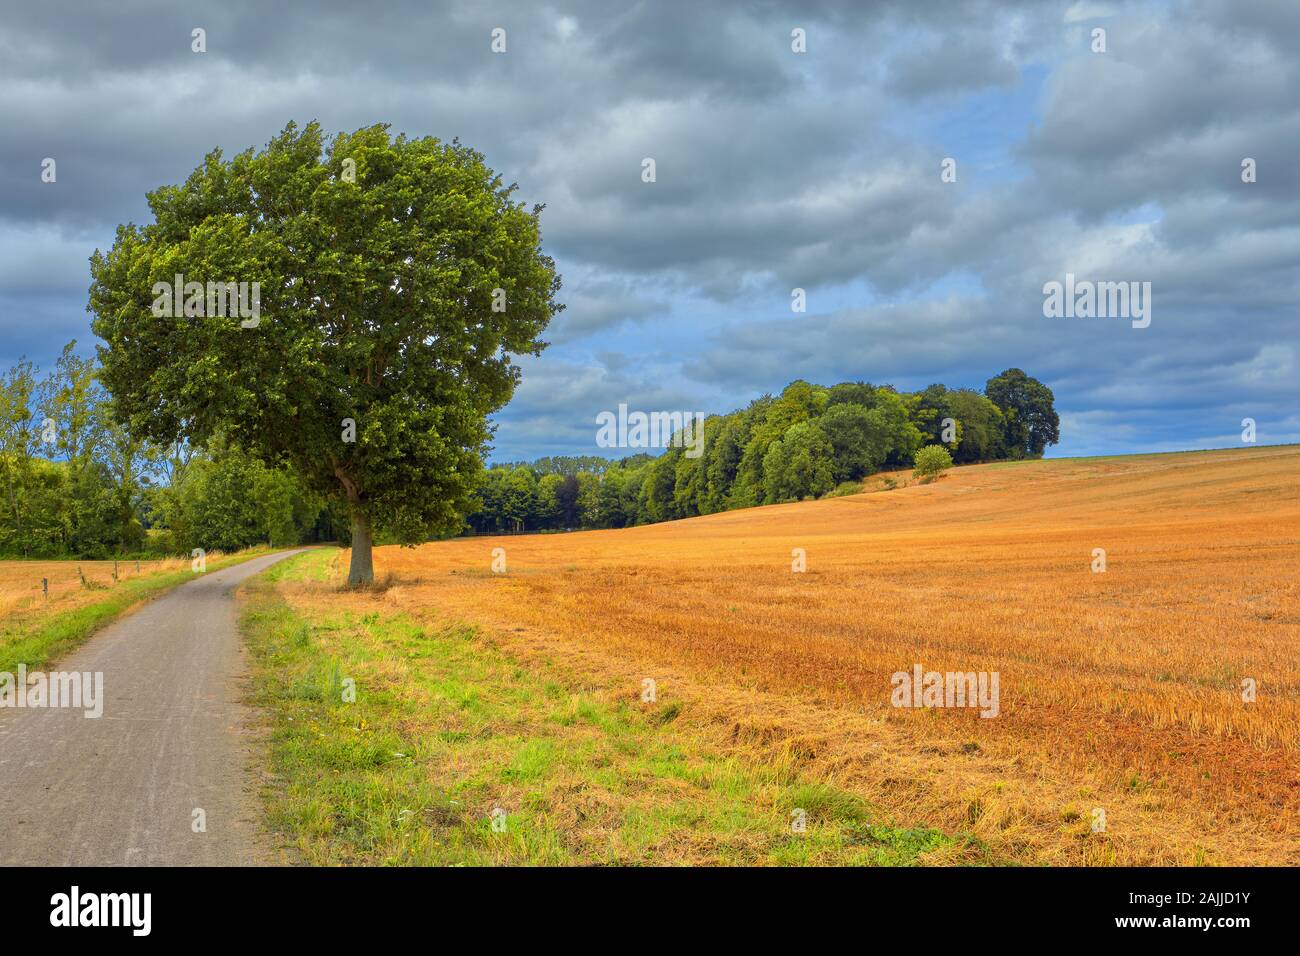 Image of the Voie Verte greenway track together with agricultural fields and trees. Brittany, France Stock Photo